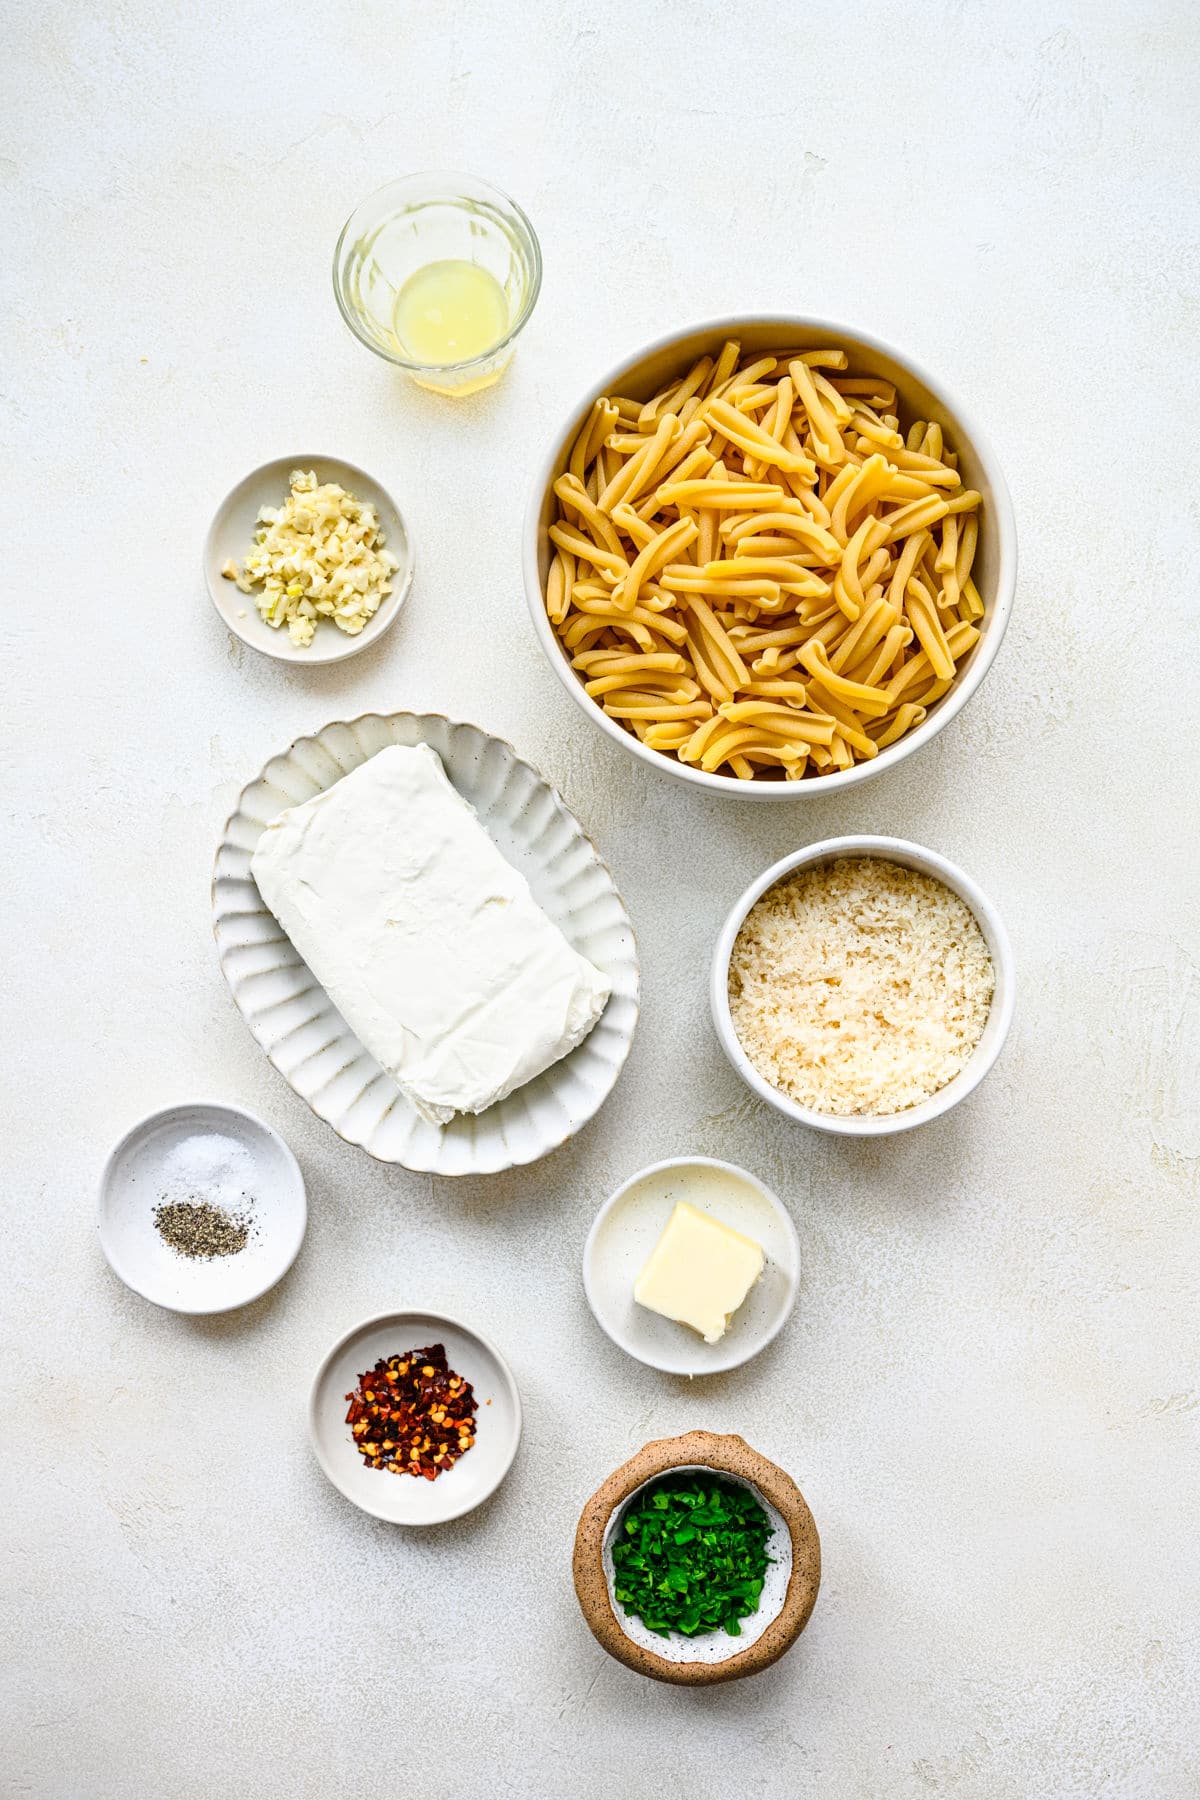 Ingredients for cream cheese pasta in dishes.